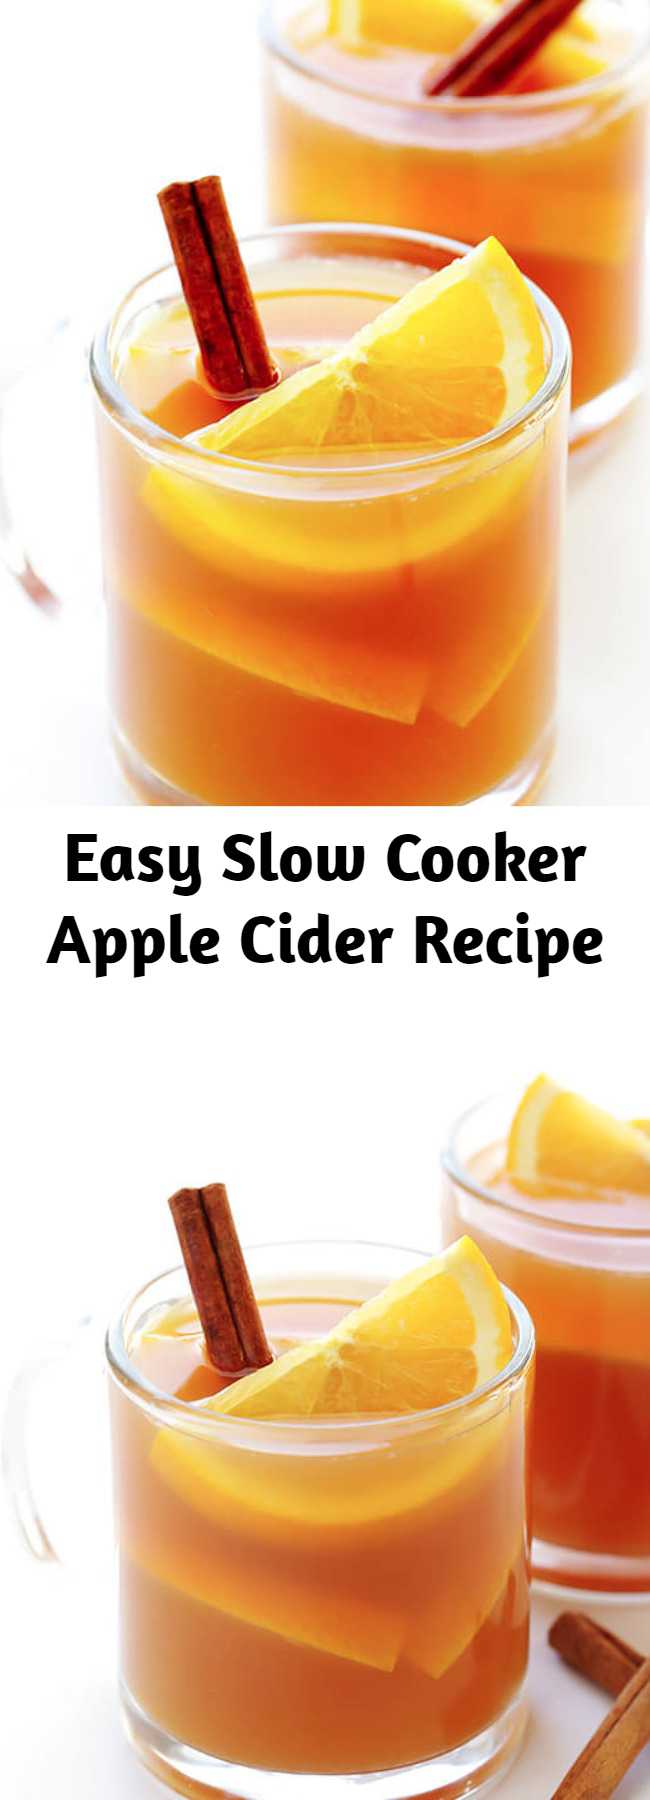 Easy Slow Cooker Apple Cider Recipe - This Slow Cooker Apple Cider recipe is easy to make from scratch, and full of the best sweet cinnamon apple flavors!